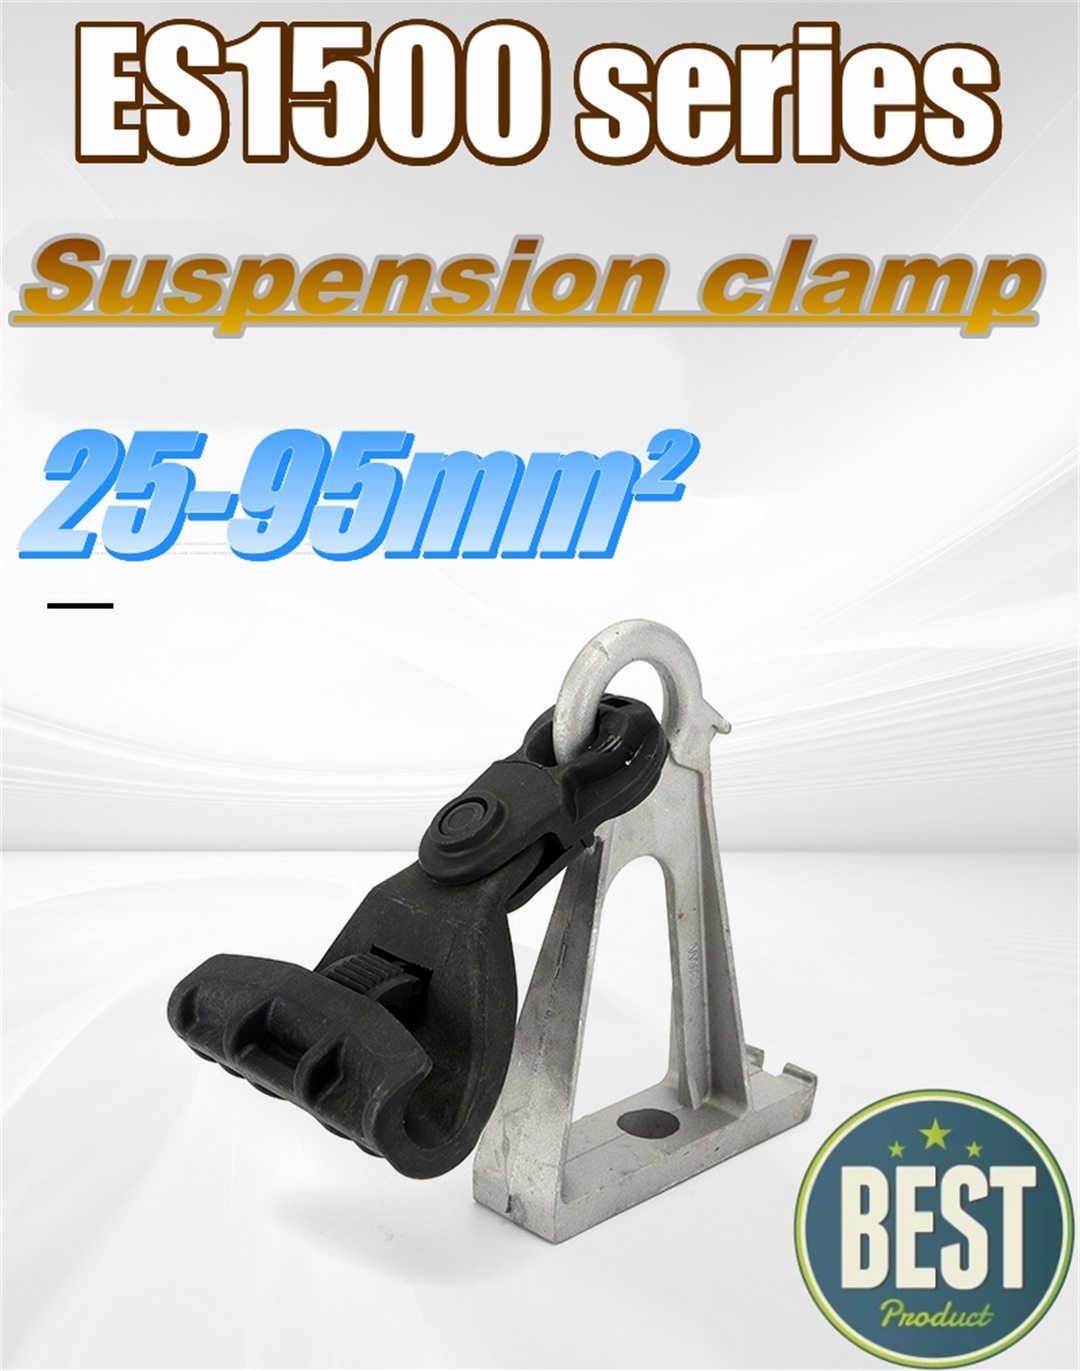 Suspension clamp of overhead cable